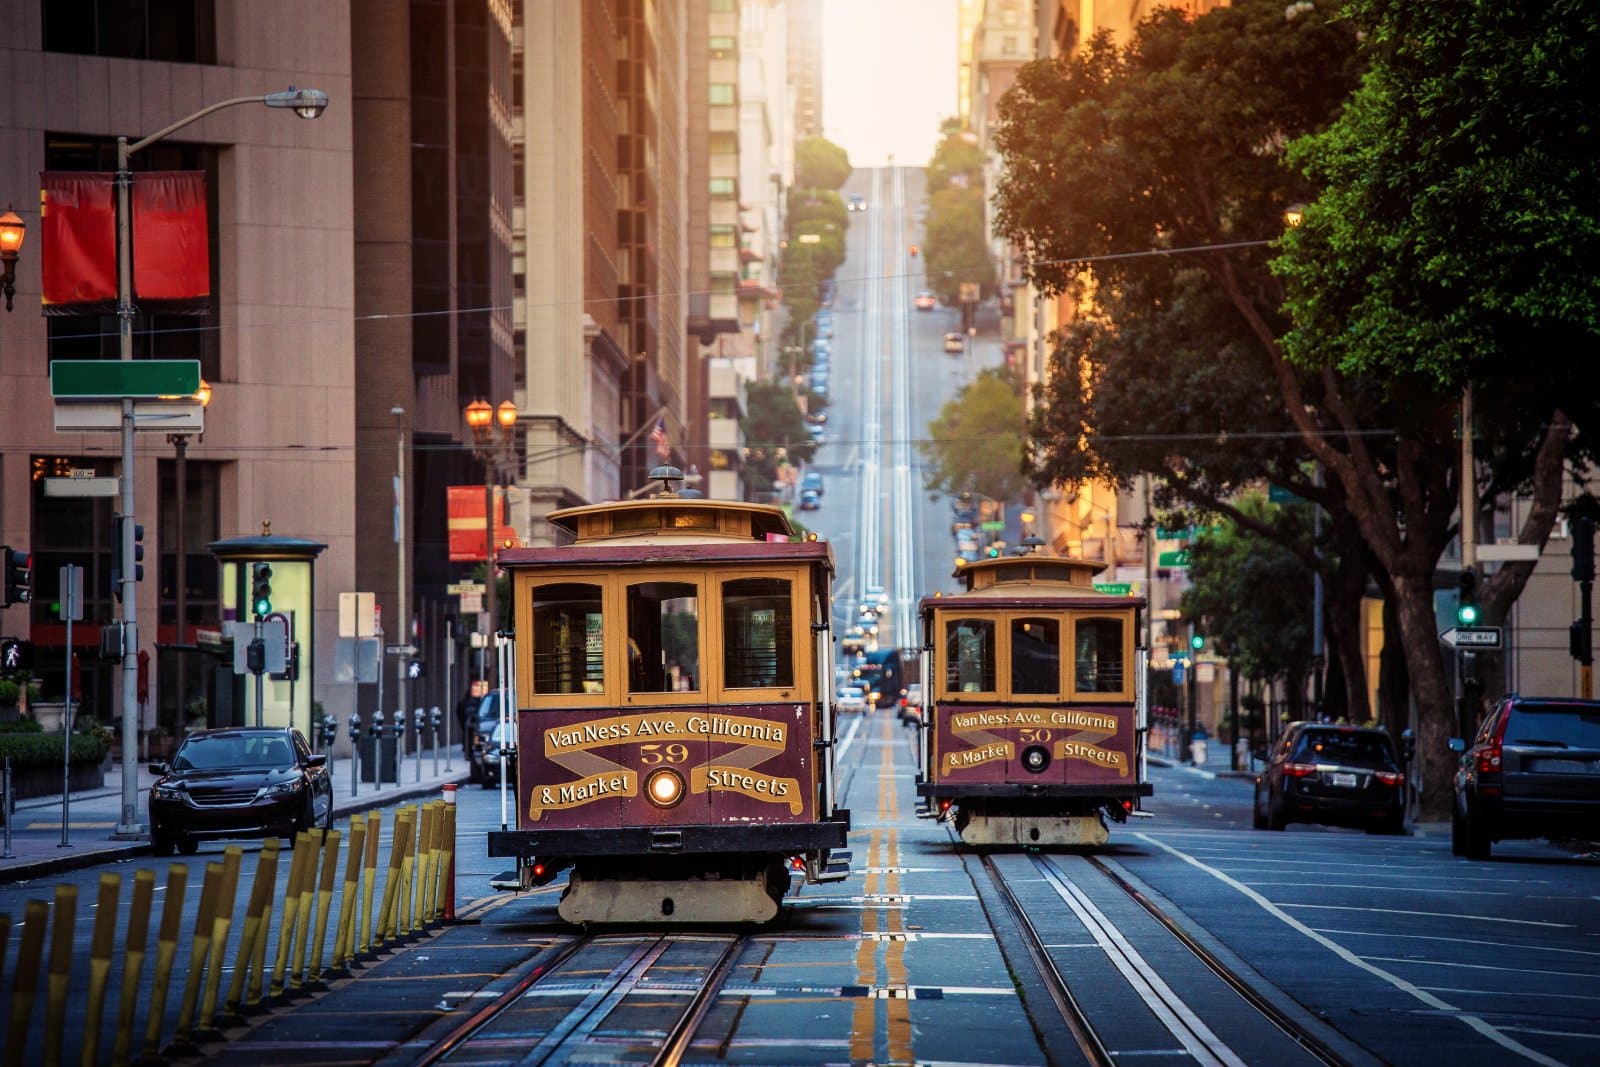 <p class="wp-caption-text">Image Credit: Shutterstock / canadastock</p>  <p><span>Cling to the side of a historic San Francisco cable car, taking in the steep hills and stunning views of the Bay Area.</span></p>